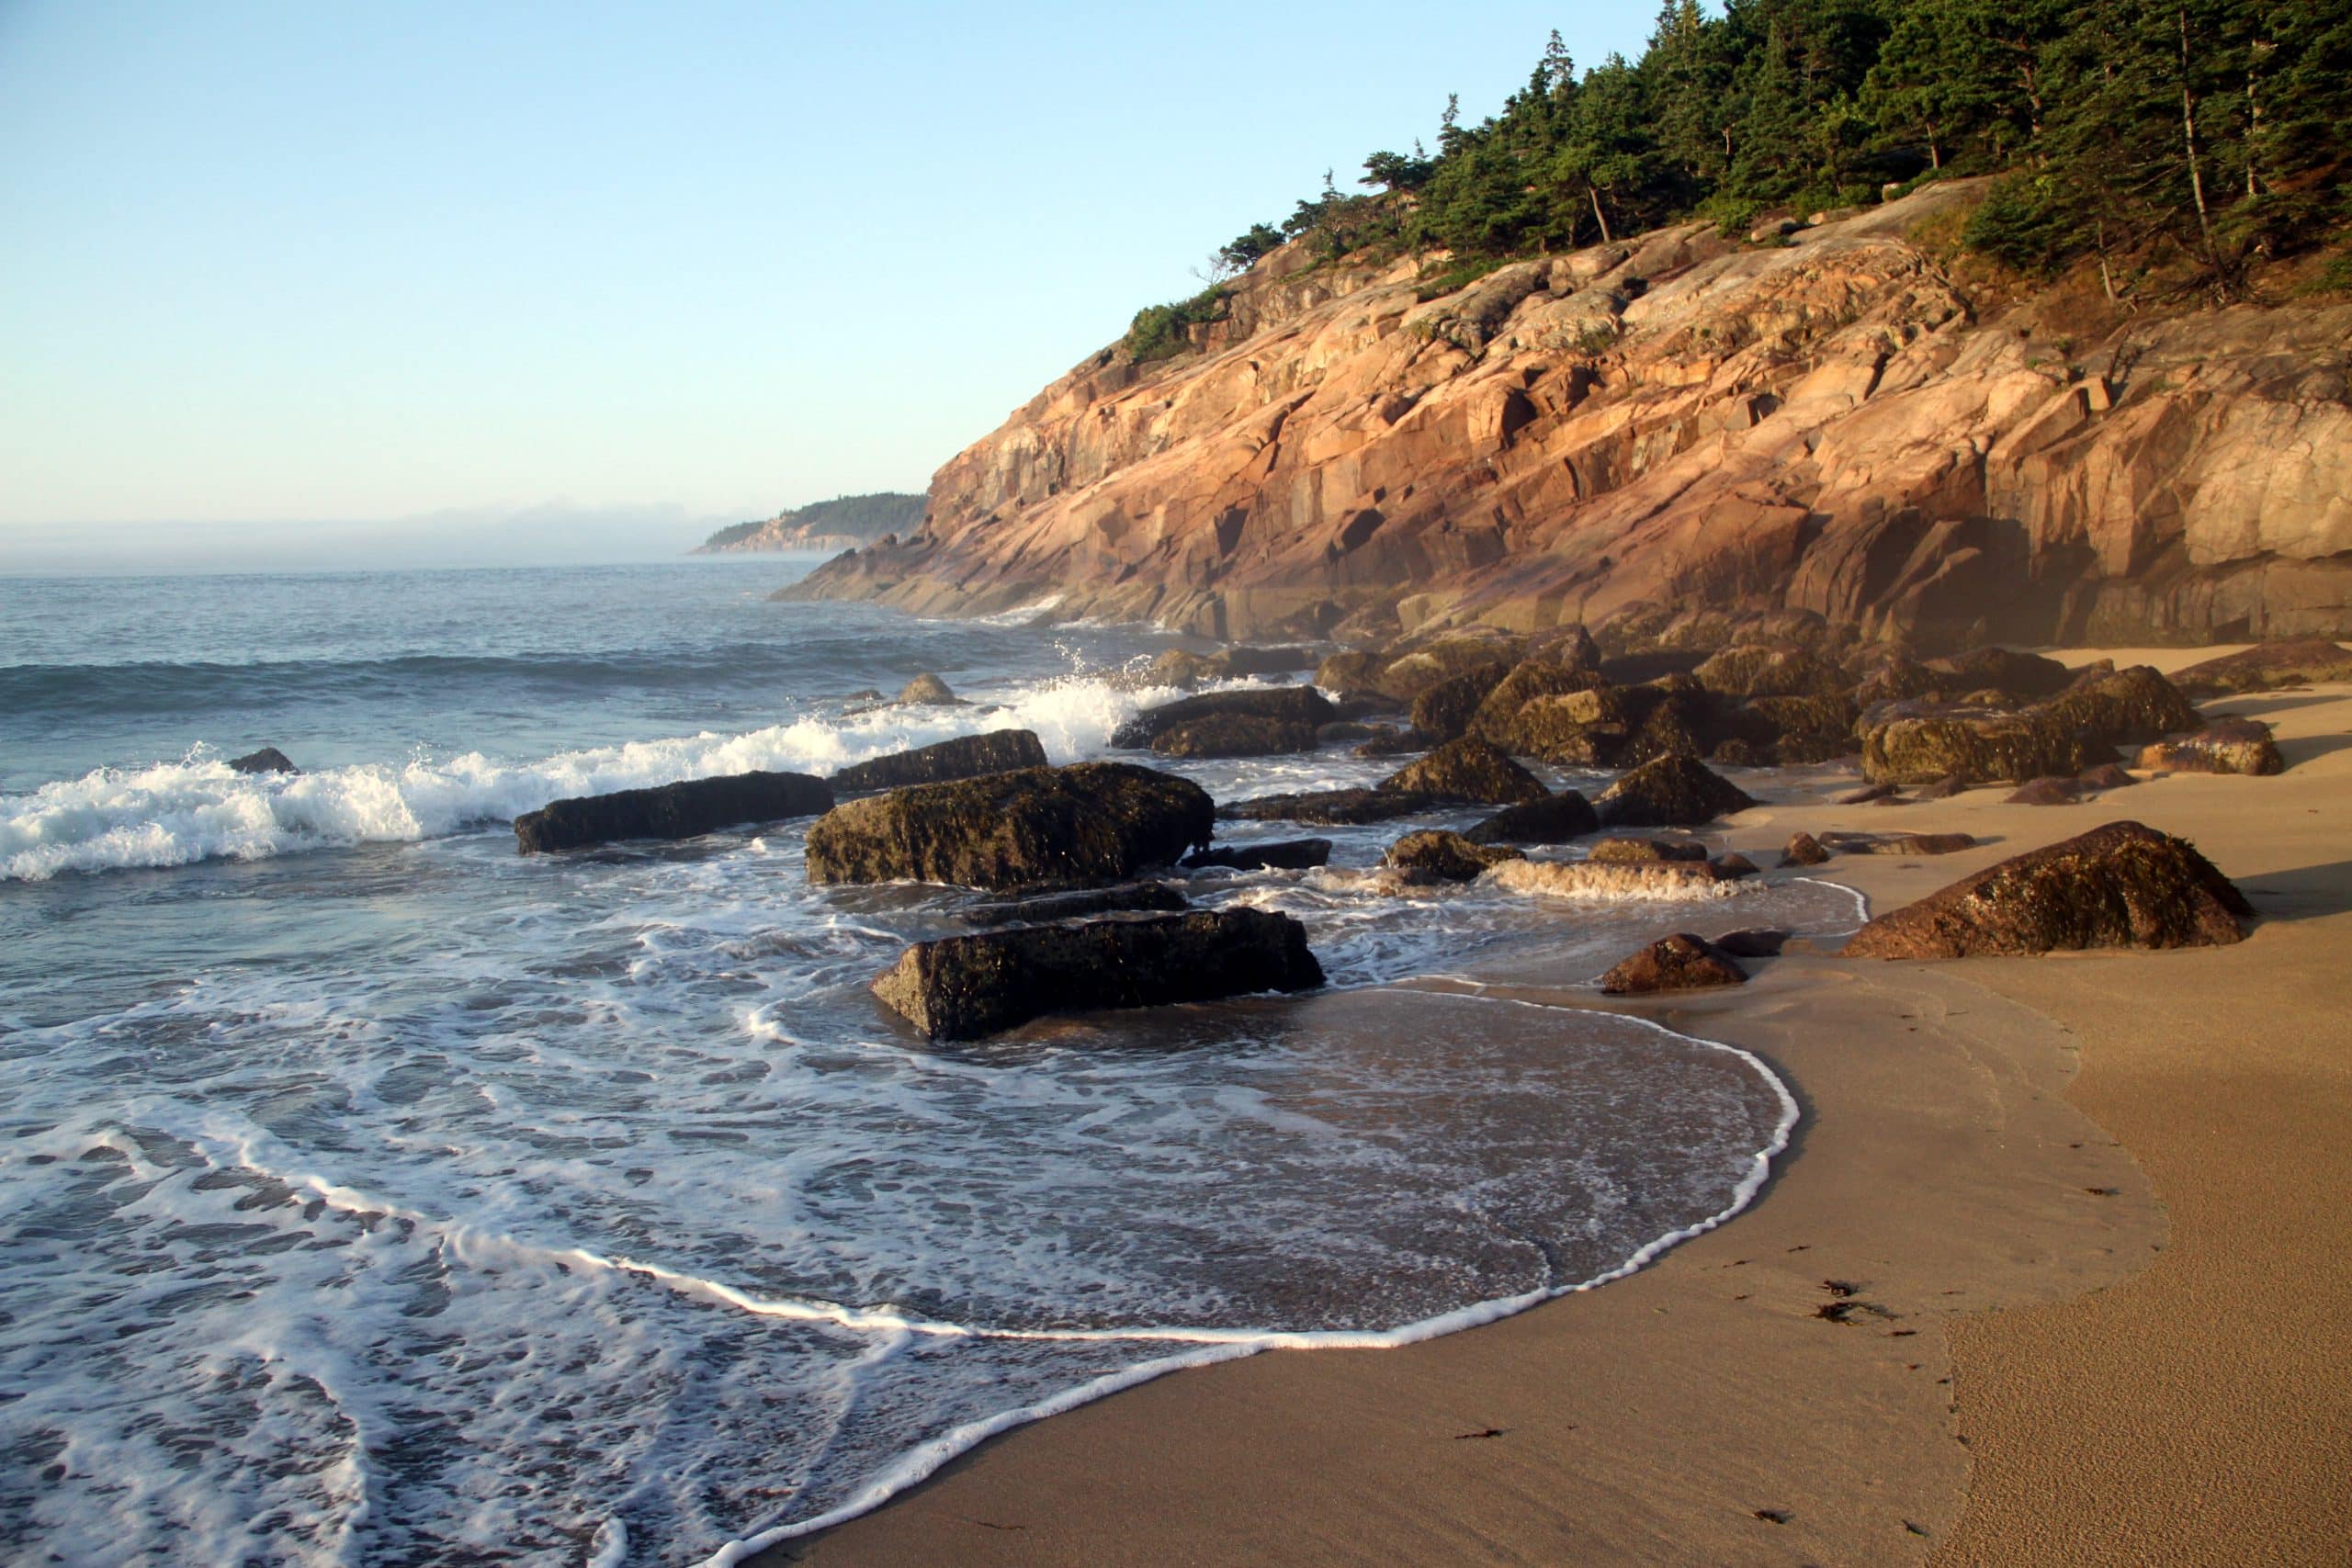 Sand Beach in Acadia National Park-Credit Dobbs Productions and Bar Harbor Chamber of Commerce